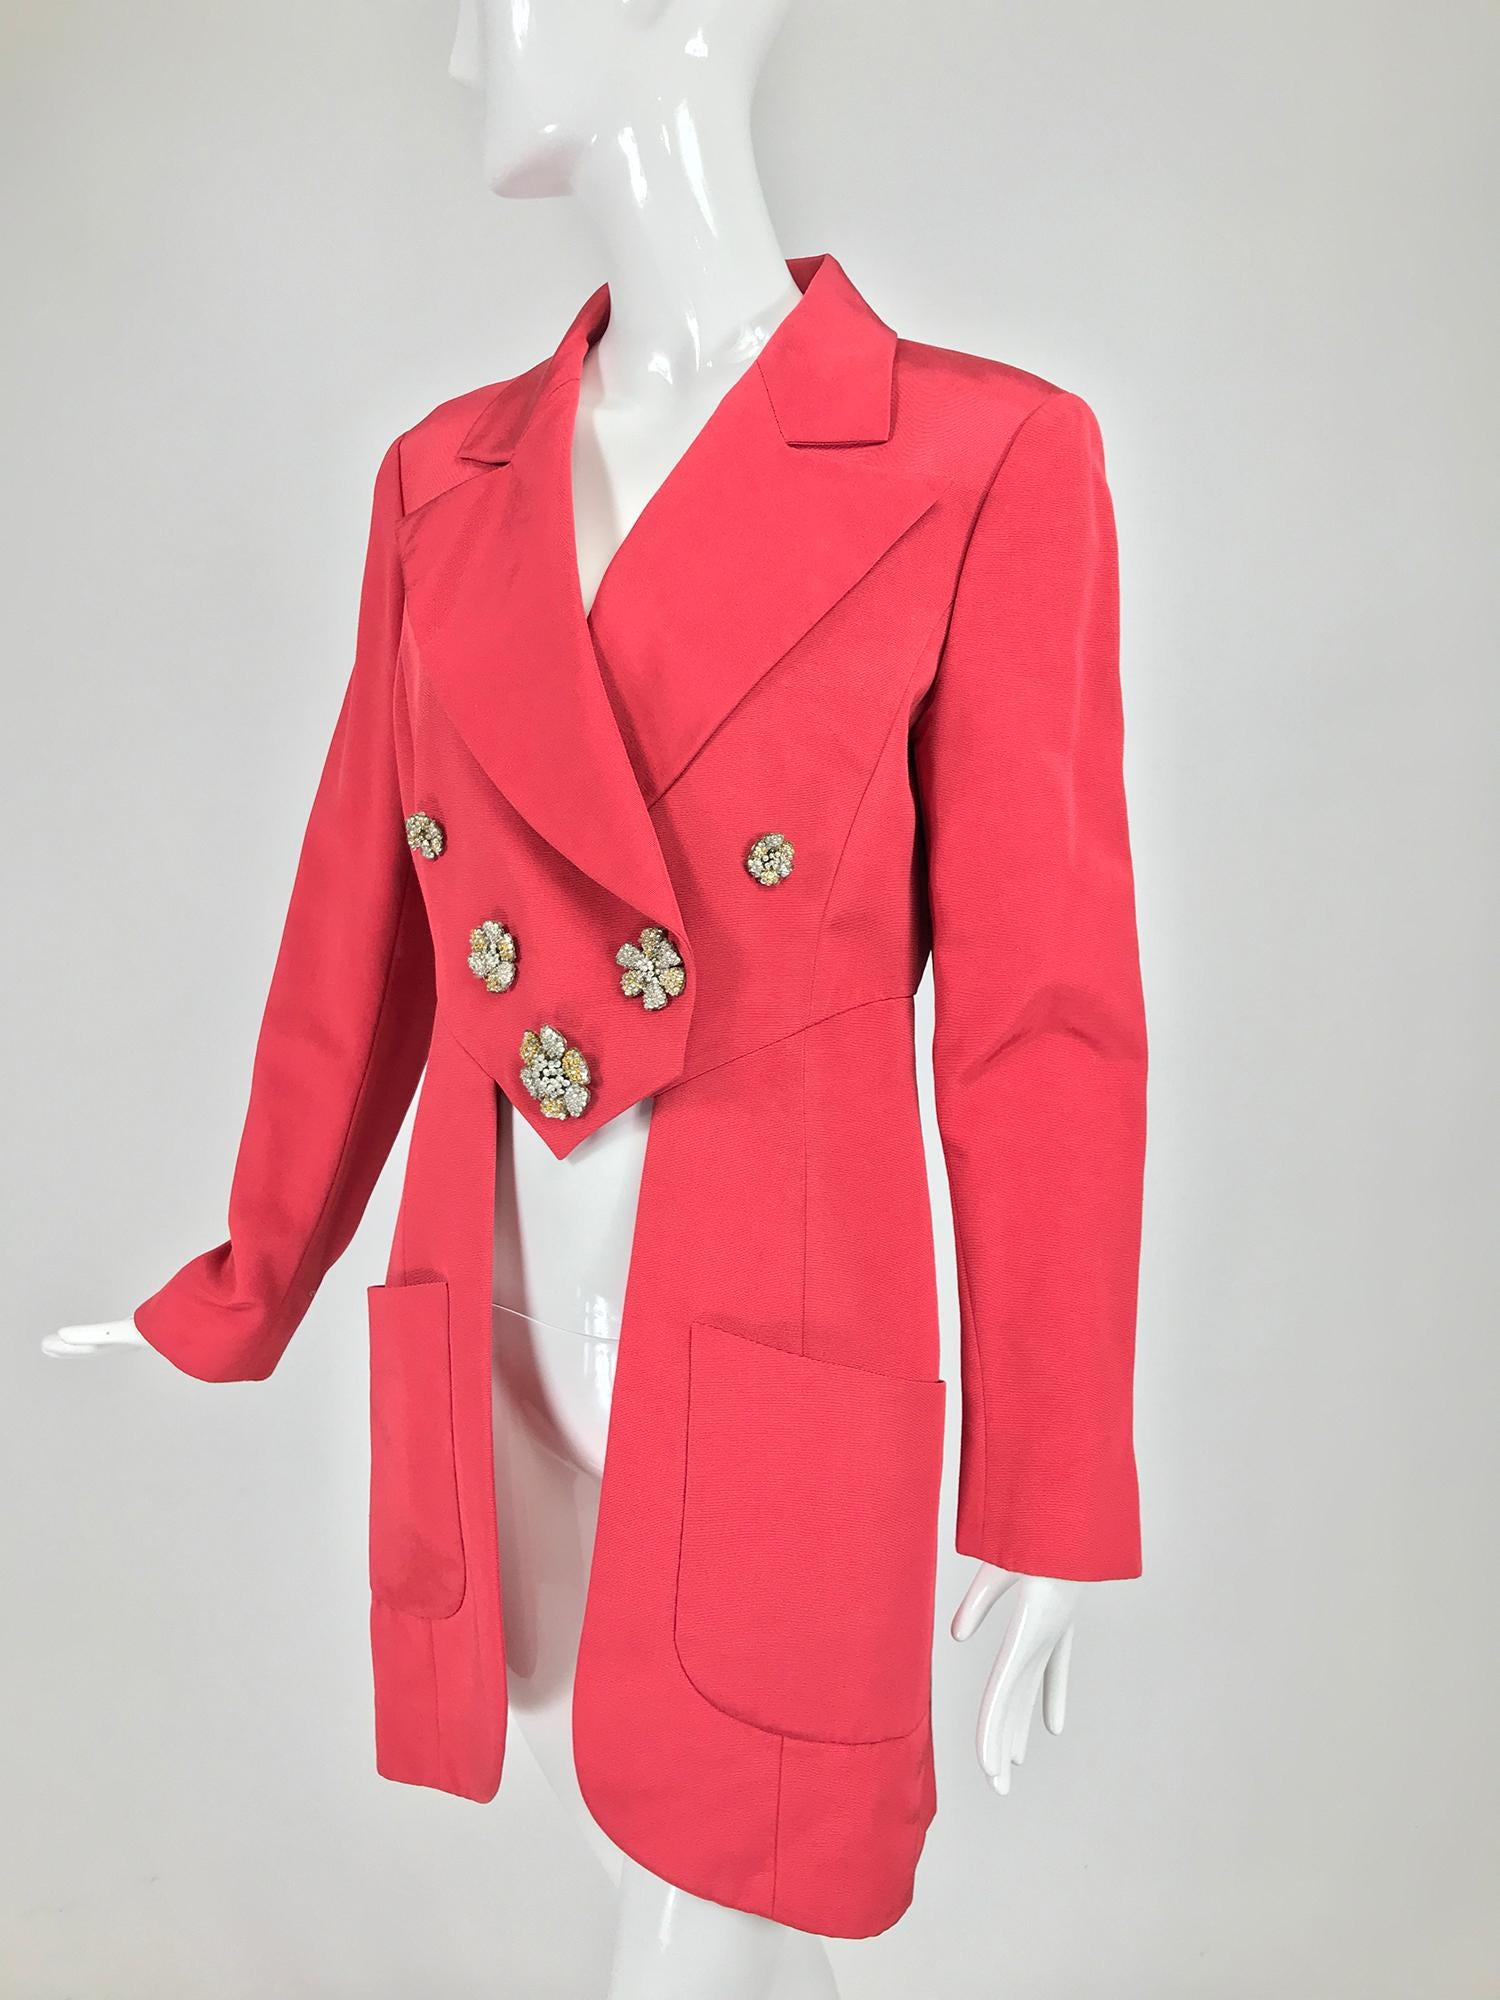 Karl Lagerfeld coral red silk faille reddingote style coat from the 1990s. This amazing coat is done in a beautiful shade of coral, the jacket front has princess seams, with double breasted closing and wide lapels. The jacket closes with hidden